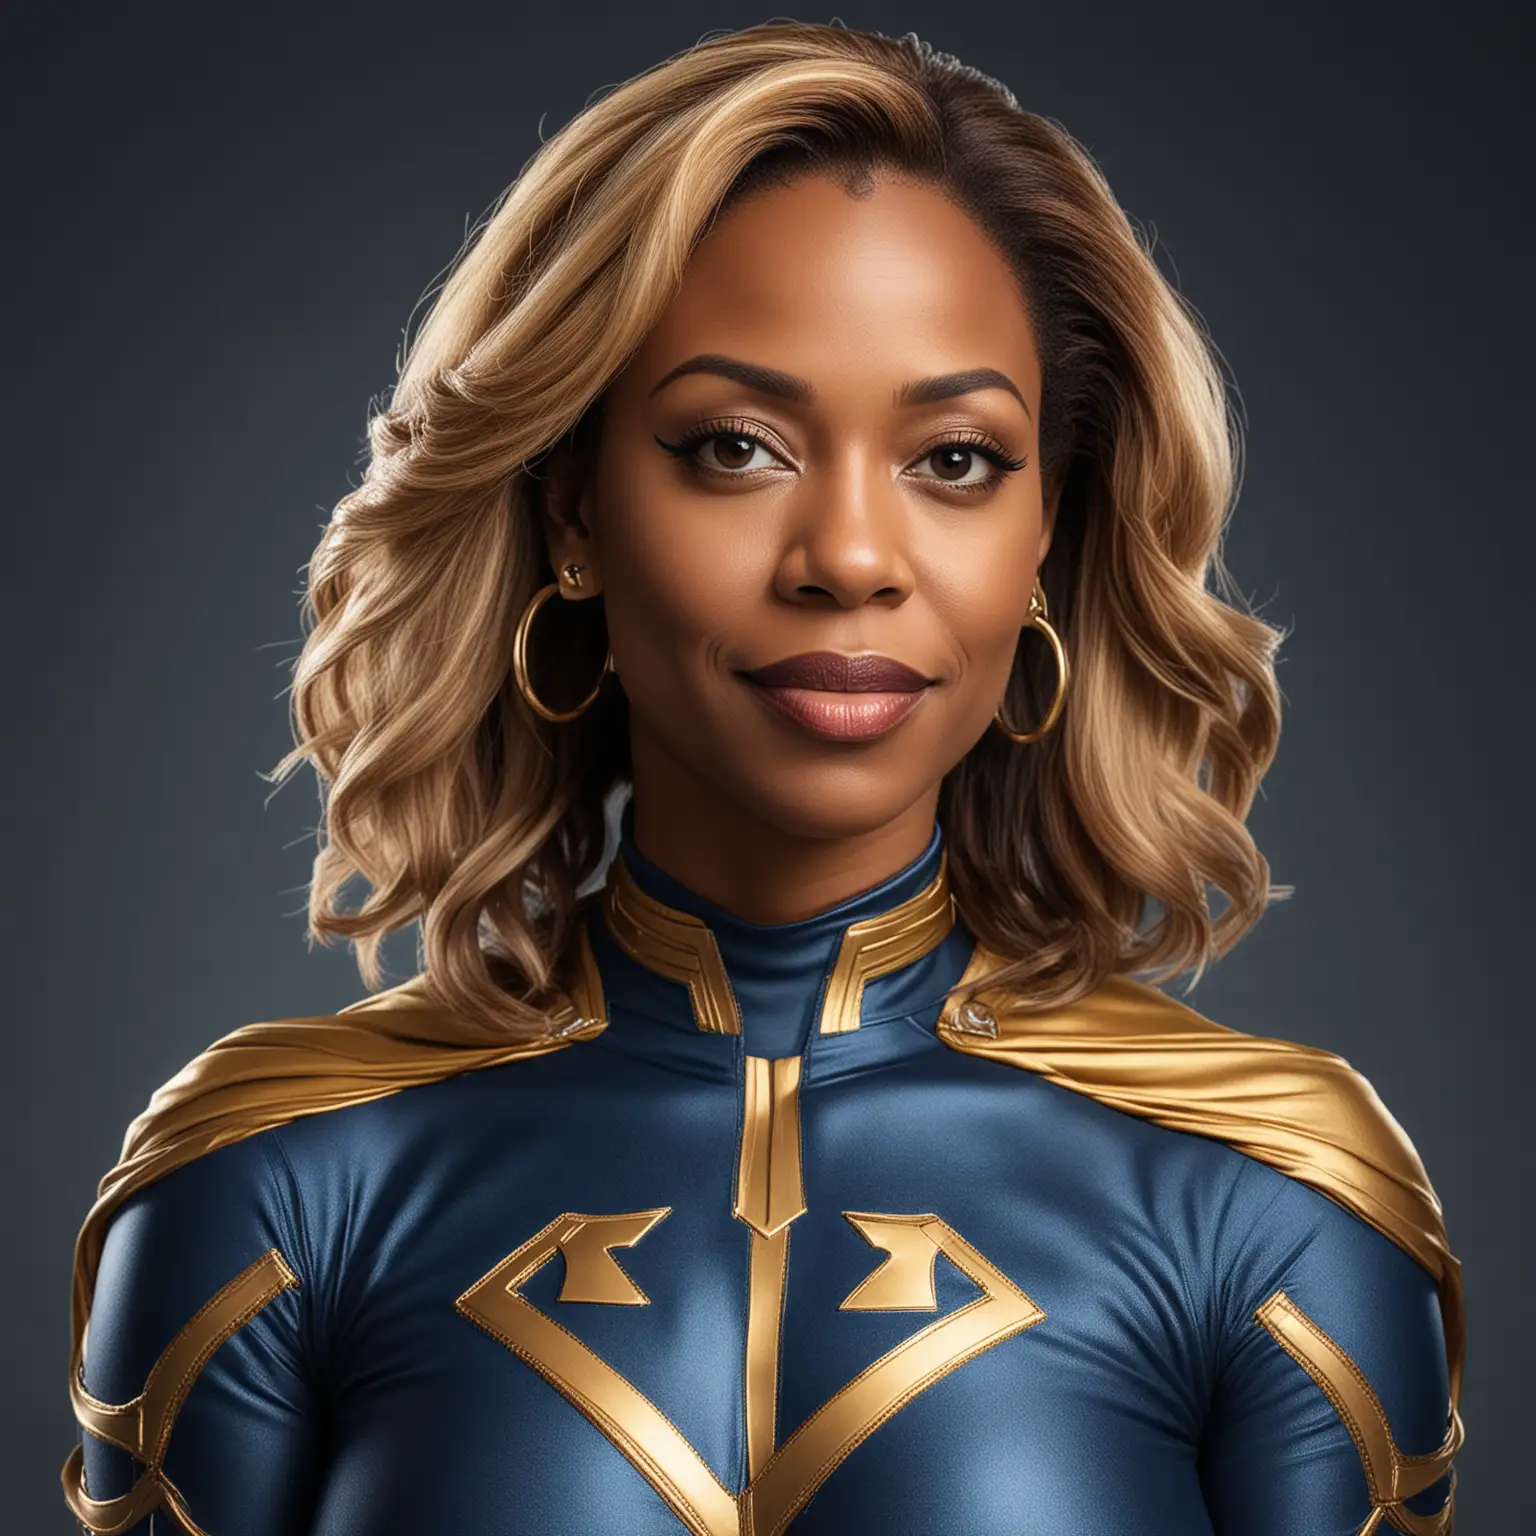 Create a headshot of an light skin African American middle aged woman who is the LinkedIn Outreach Specialist
in dark blue and gold superhero clothes cinematic Marvel style with two interlocking links on the chest